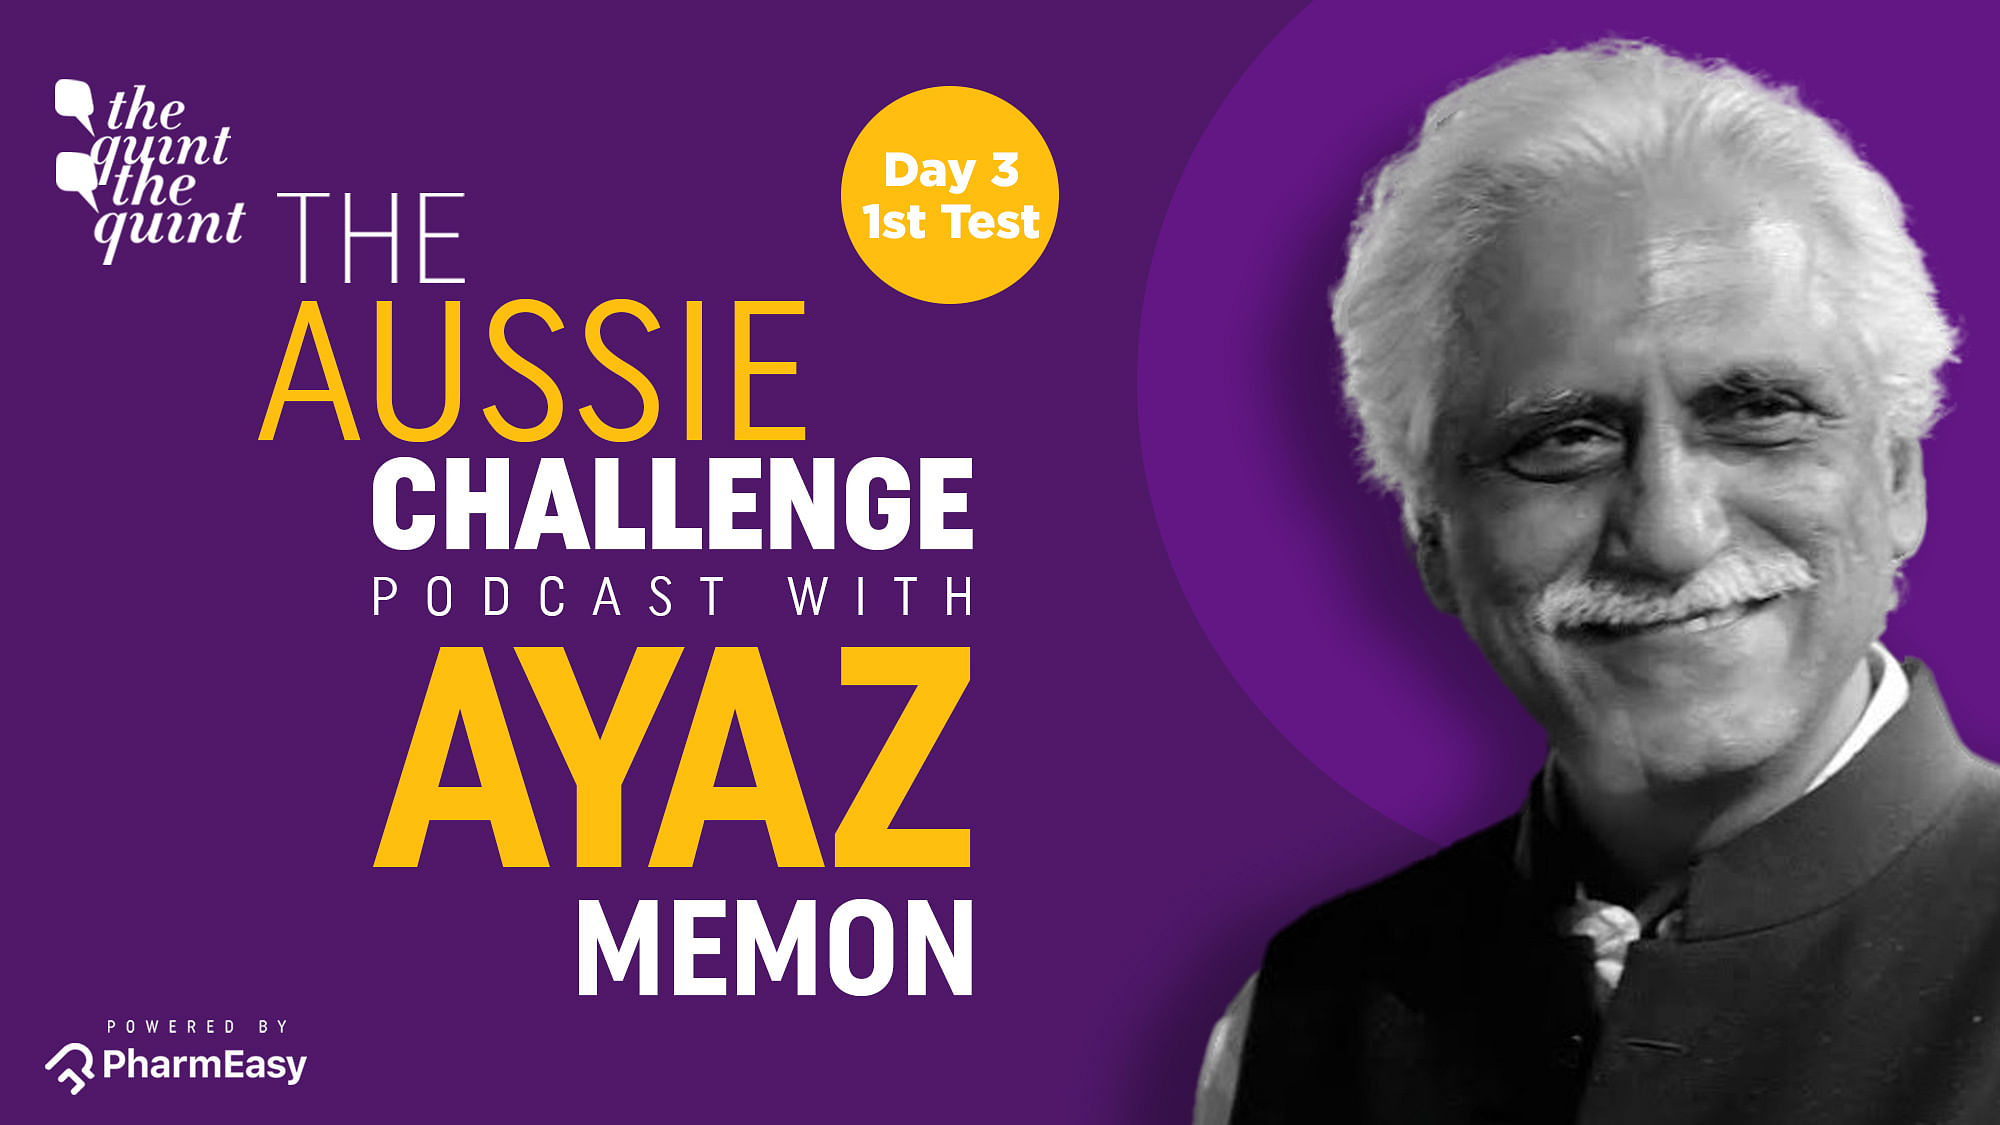 On Episode 9 of The Aussie Challenge Podcast with Ayaz Memon, we discuss India’s massive collapse on Day 3 of the Adelaide Test.